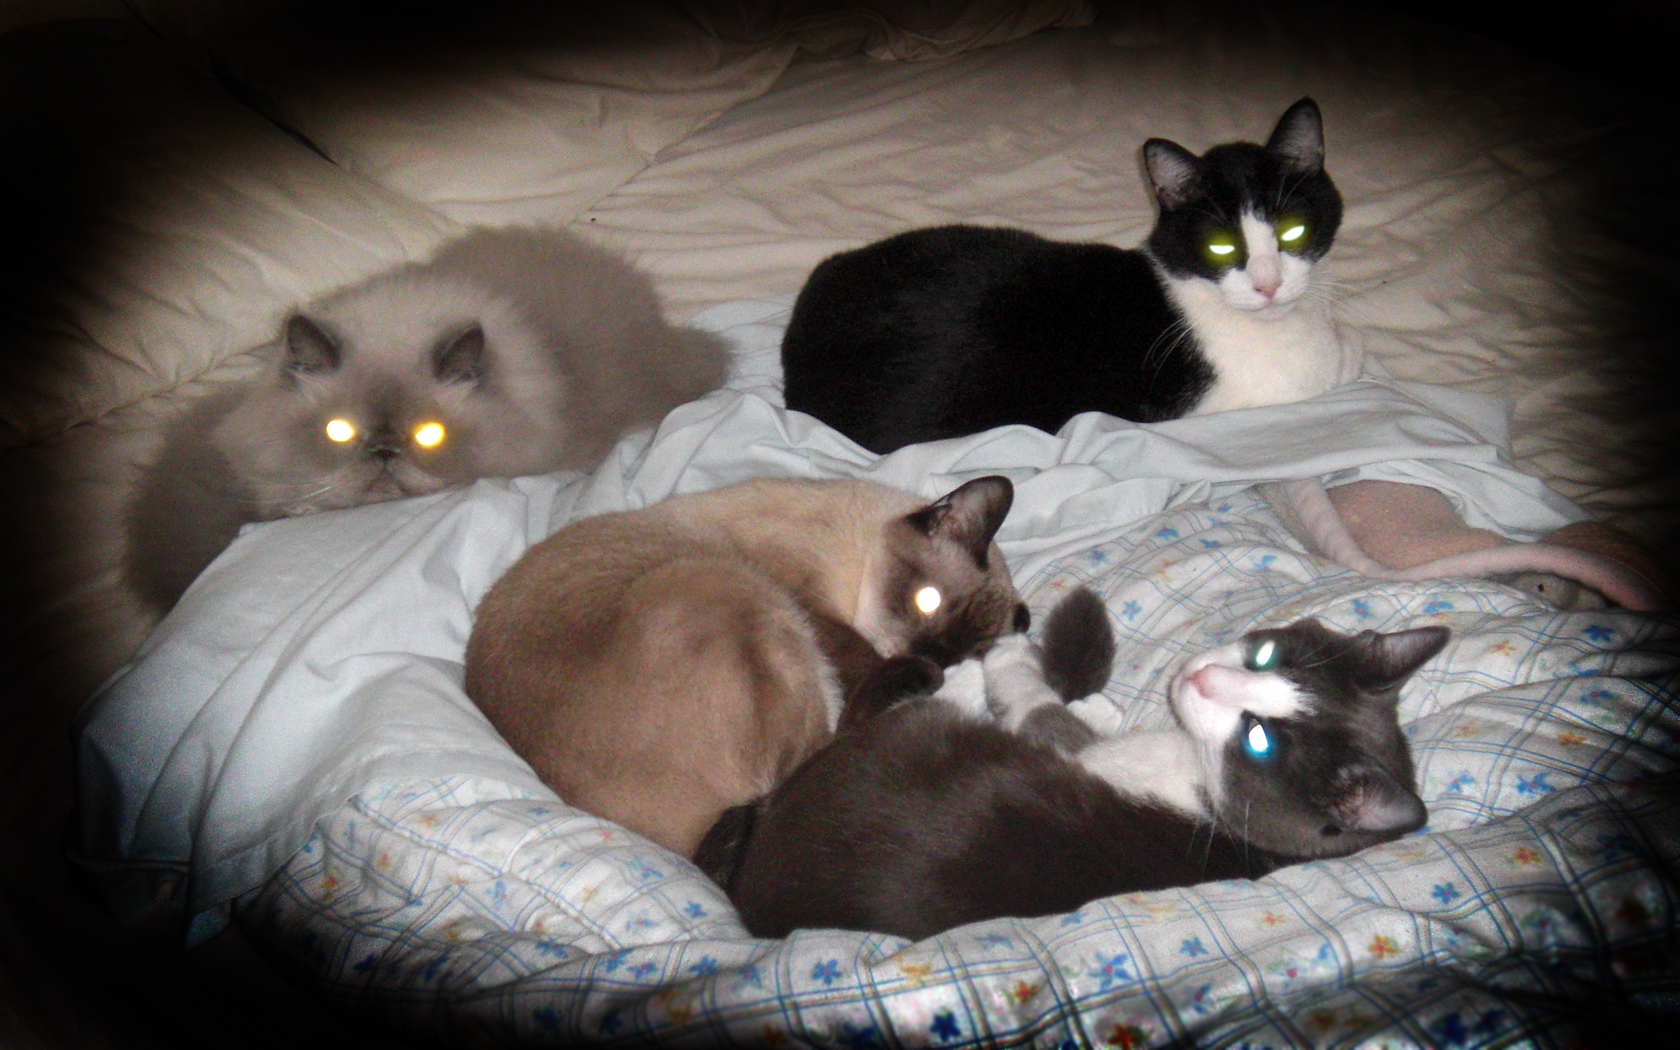 laser_eyes_4_cats_by_stele4cats-d3bgse9.jpg